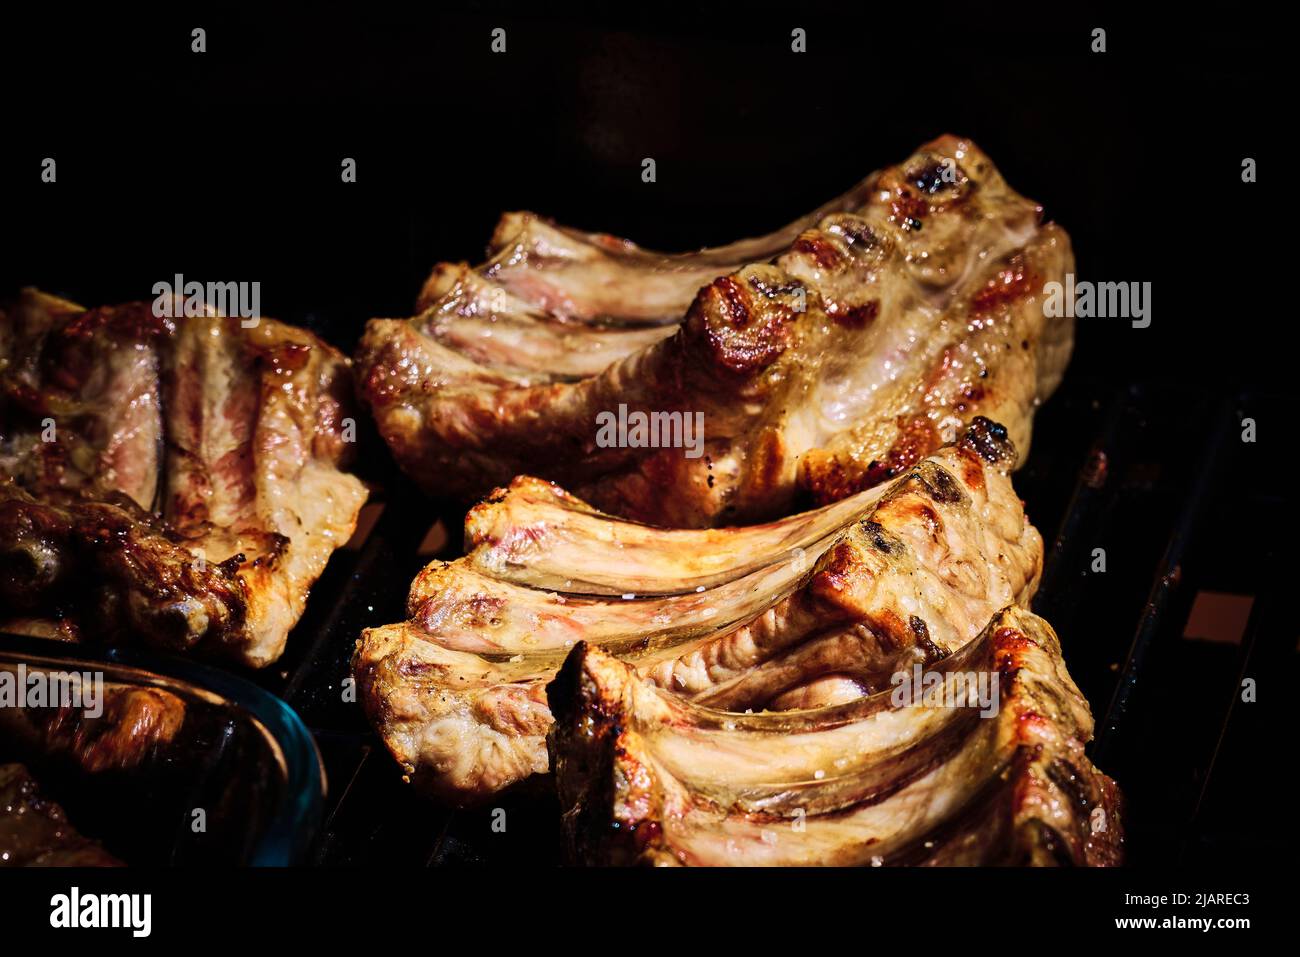 juicy beef rib and pork rib slowly being made on the grill on the fire at a gas barbecue Stock Photo